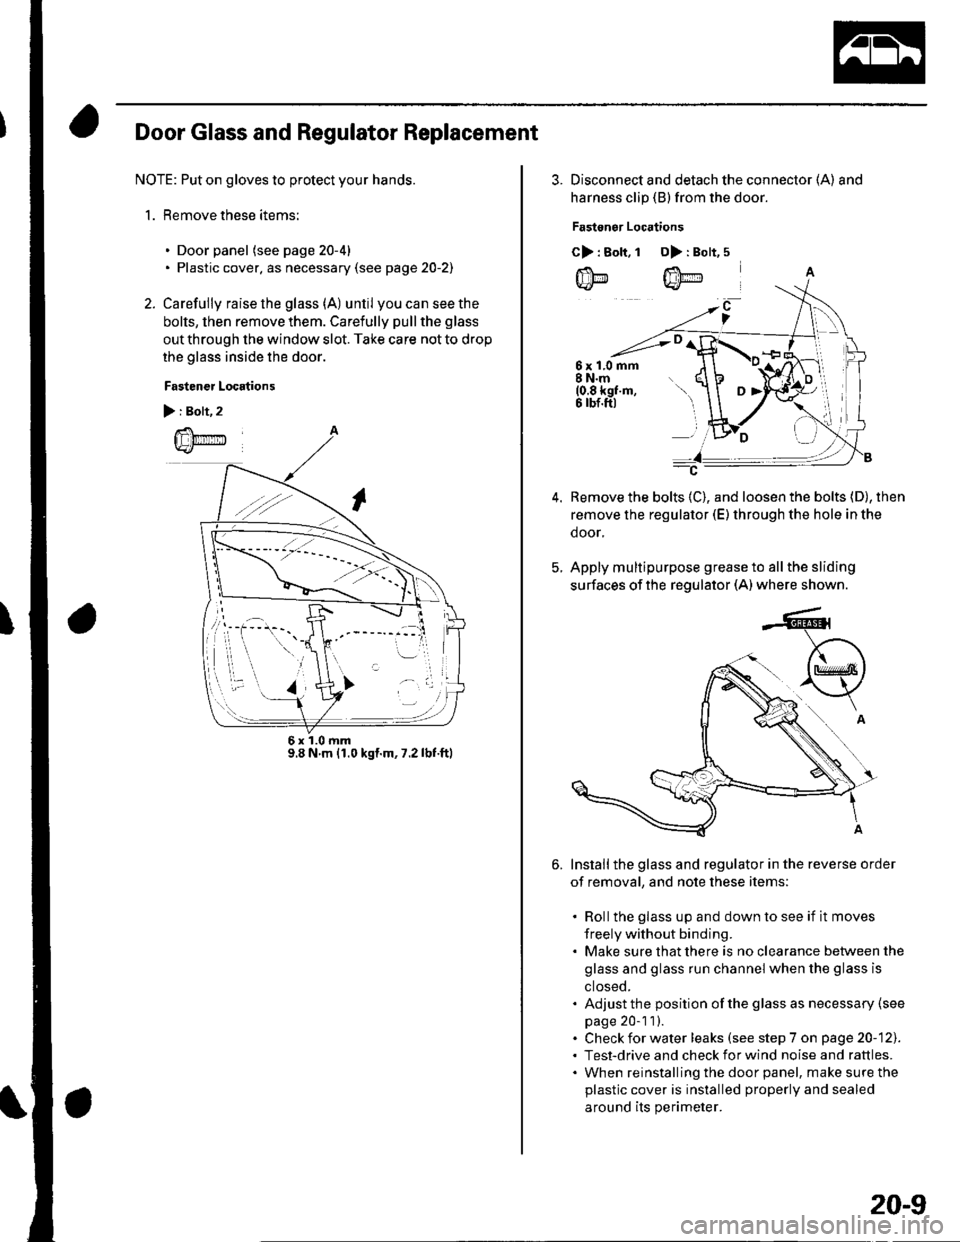 HONDA CIVIC 2003 7.G Workshop Manual Door Glass and Regulator Replacement
NOTE: Put on gloves to protect your hands.
1. Remove these items:
. Door panel (see page 20-4). Plastic cover. as necessary (see page 20-2)
2. Carefully raise the 